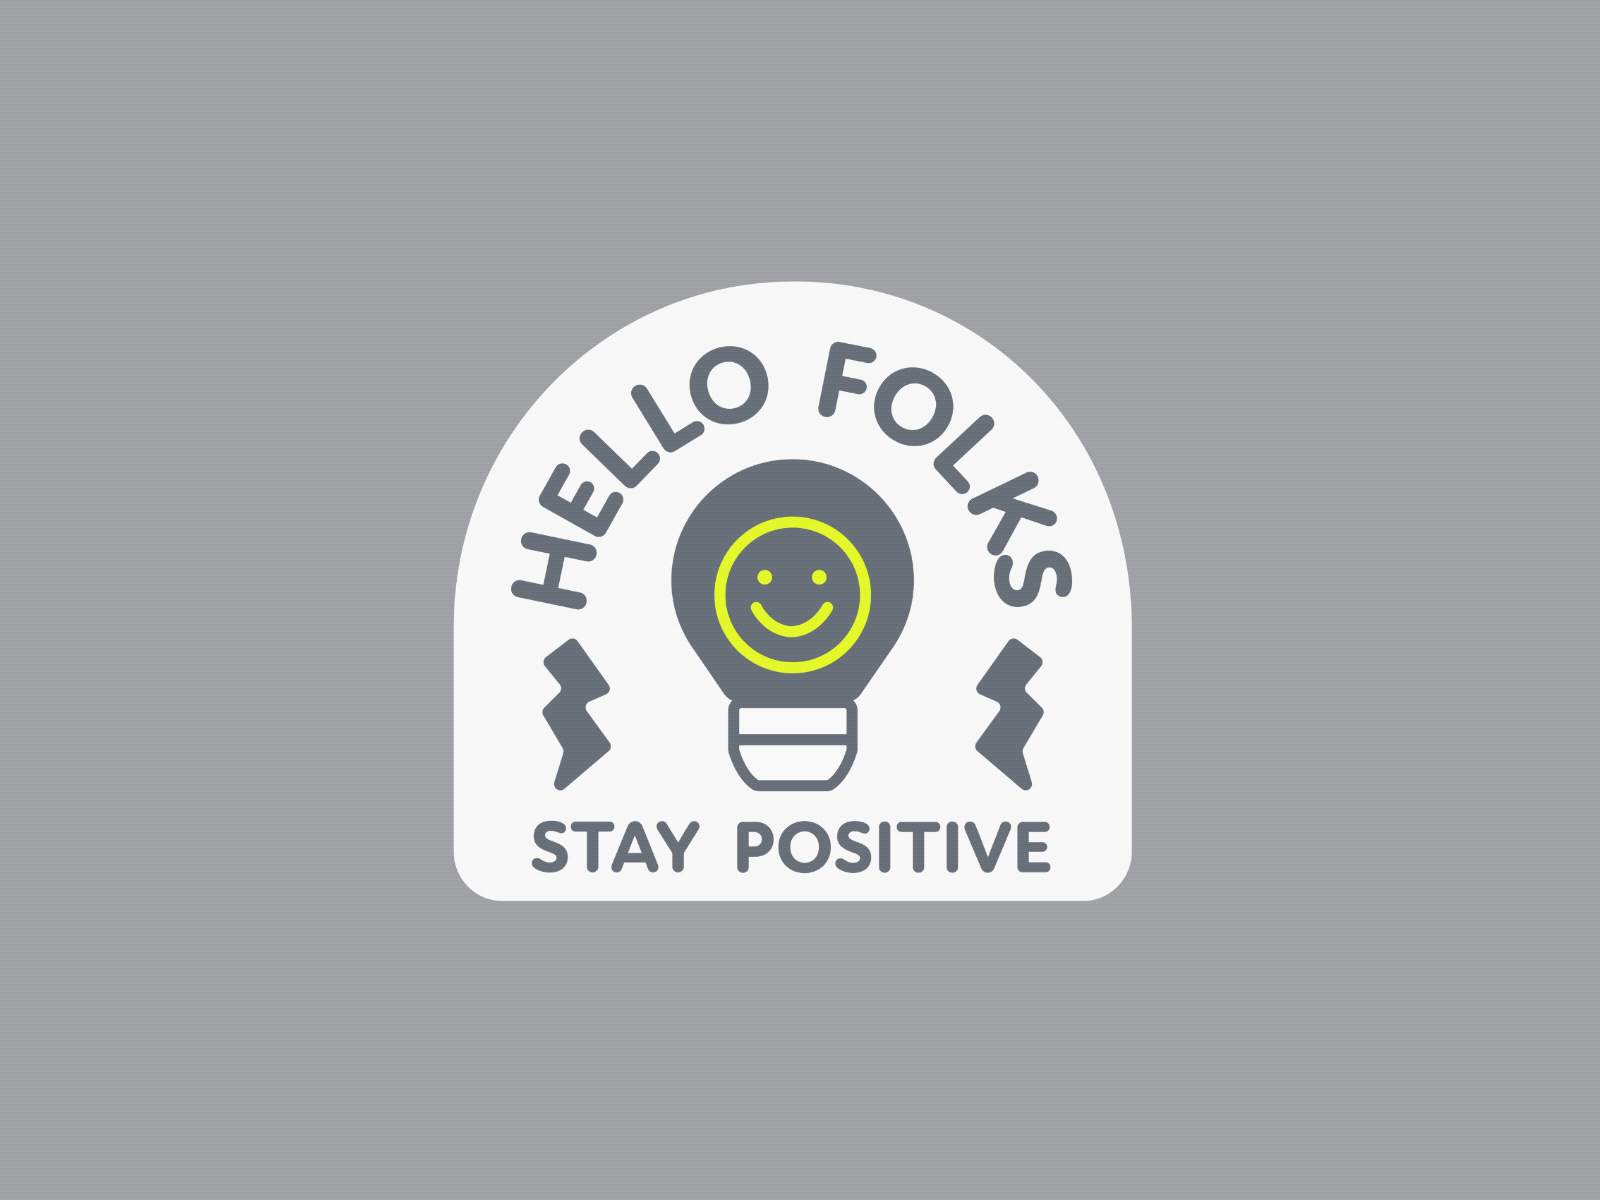 Hello Folks , Stay Positive GIF animated gif animated illustration animated illustrations animation gif badge badgedesign gif animated gif animation gifs giphy giphy art giphy artist giphy artists giphy gif giphy sticker hello folks positive vibes positivity stay positive